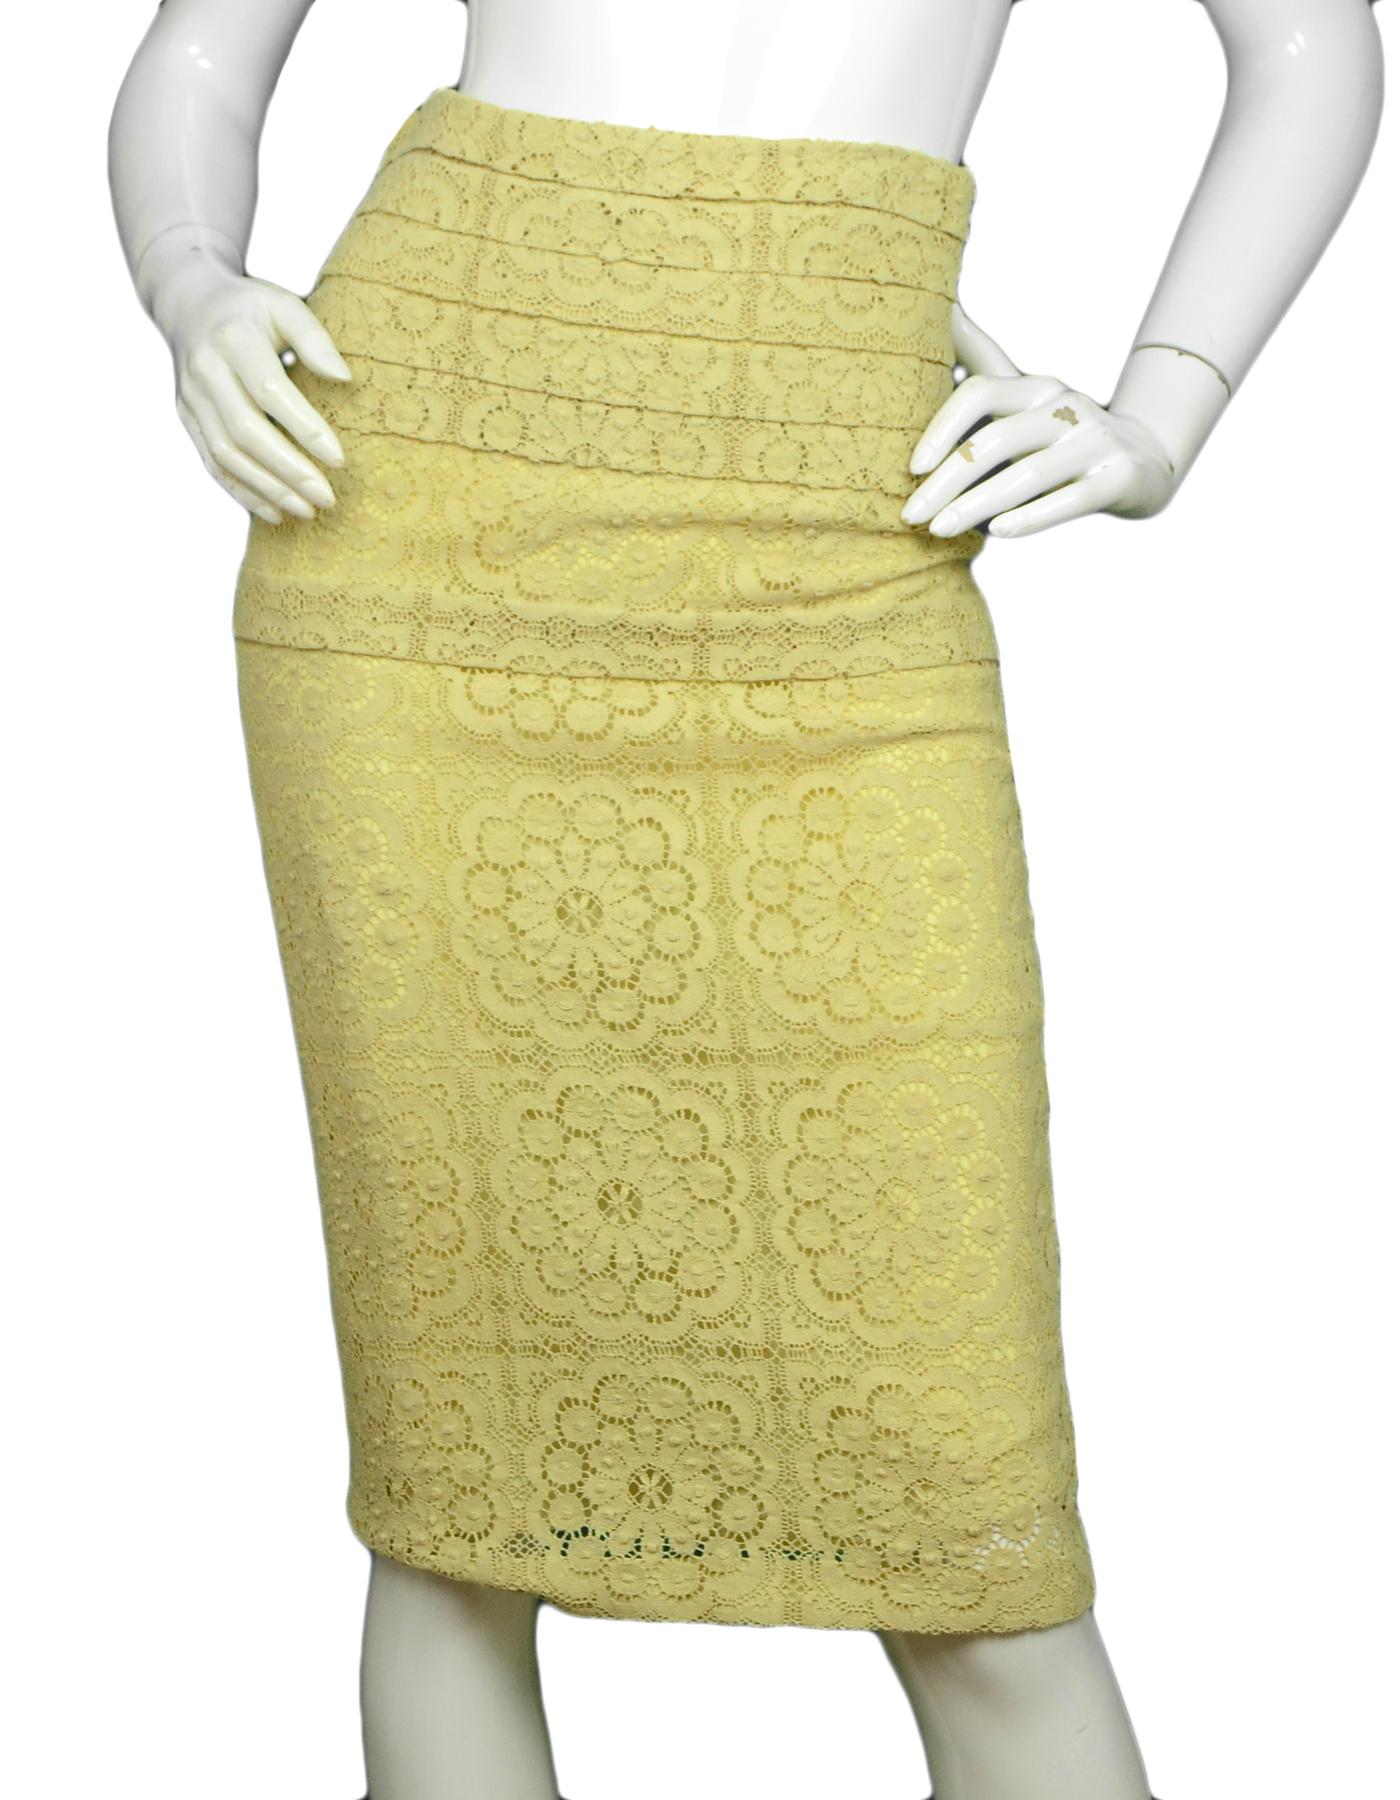 Burberry Chartreuse Cotton-Blend Lace High Waist Pencil Skirt sz US2

Made In: Italy
Color: Chartreuse
Materials: 95% Cotton, 5% Nylon
Lining: 100% Silk
Closure/Opening: Back zipper
Overall Condition: Excellent pre-owned condition

Tag Size: US